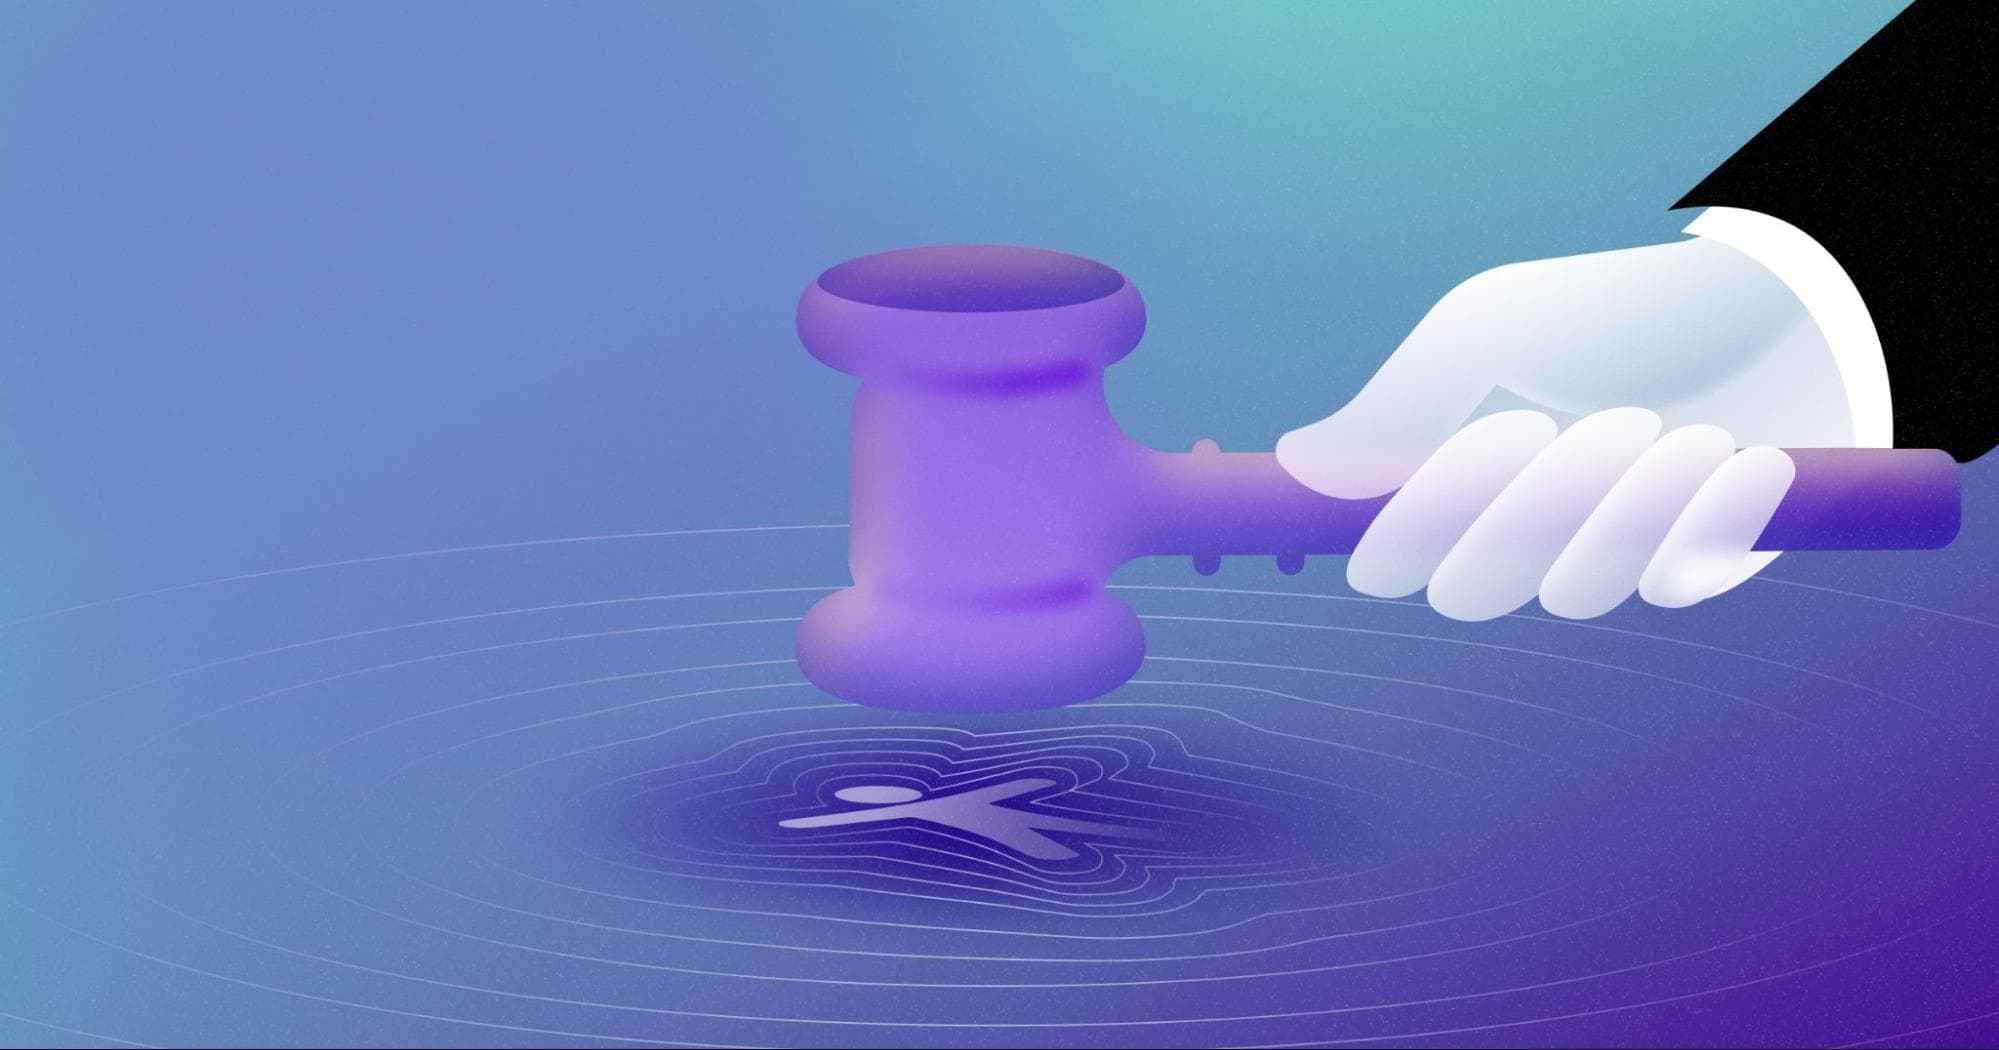 Illustration of a hand bringing down a purple gavel onto the web accessibility icon.